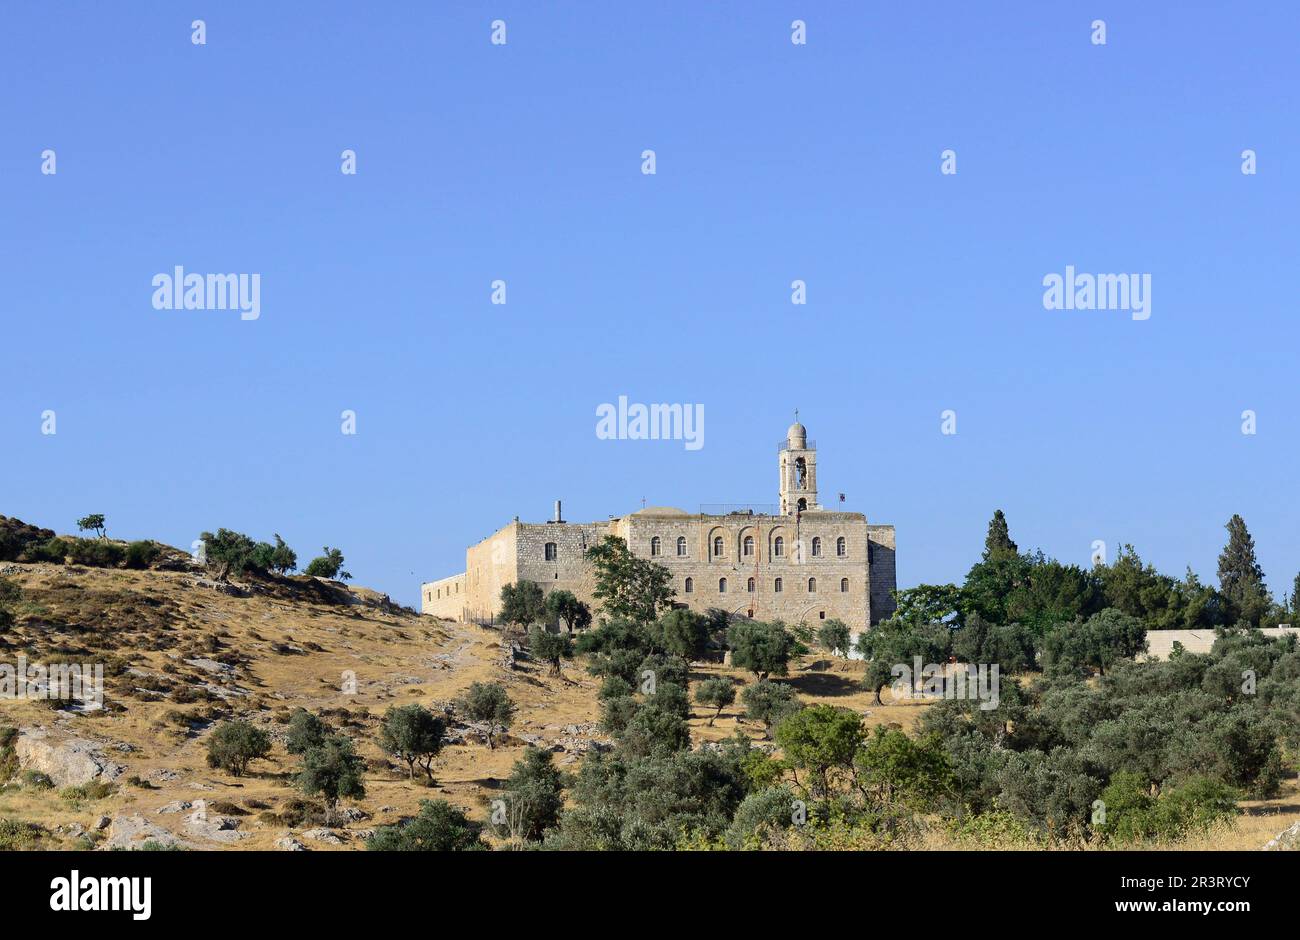 Mar Elias Monastery on Hebron Road in the South East of Jerusalem, Israel. Stock Photo